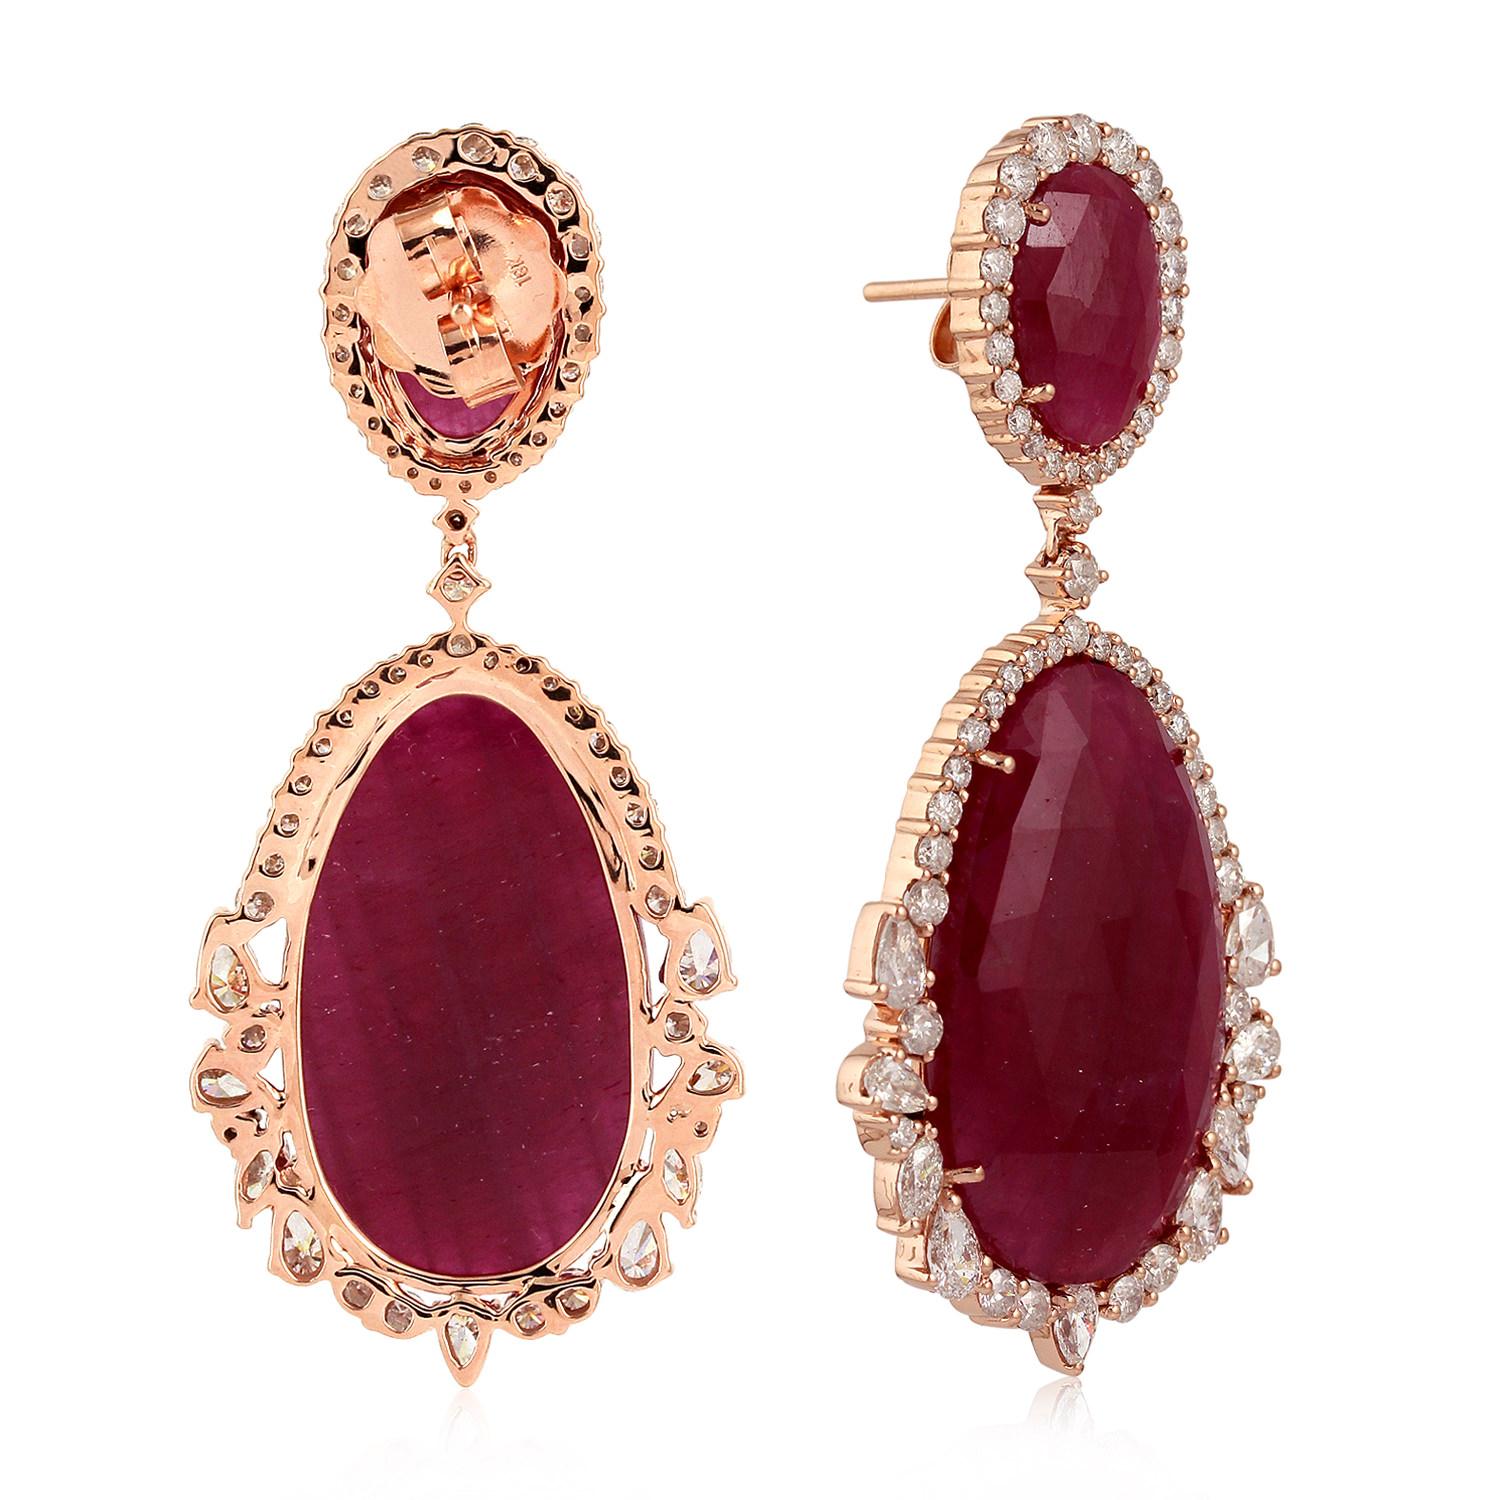 These earrings are crafted in 18 Karat gold.  It is hand set with 44.1 carats ruby and 4.42 carats of diamonds.

FOLLOW  MEGHNA JEWELS storefront to view the latest collection & exclusive pieces.  Please note that carat weights may slightly vary as